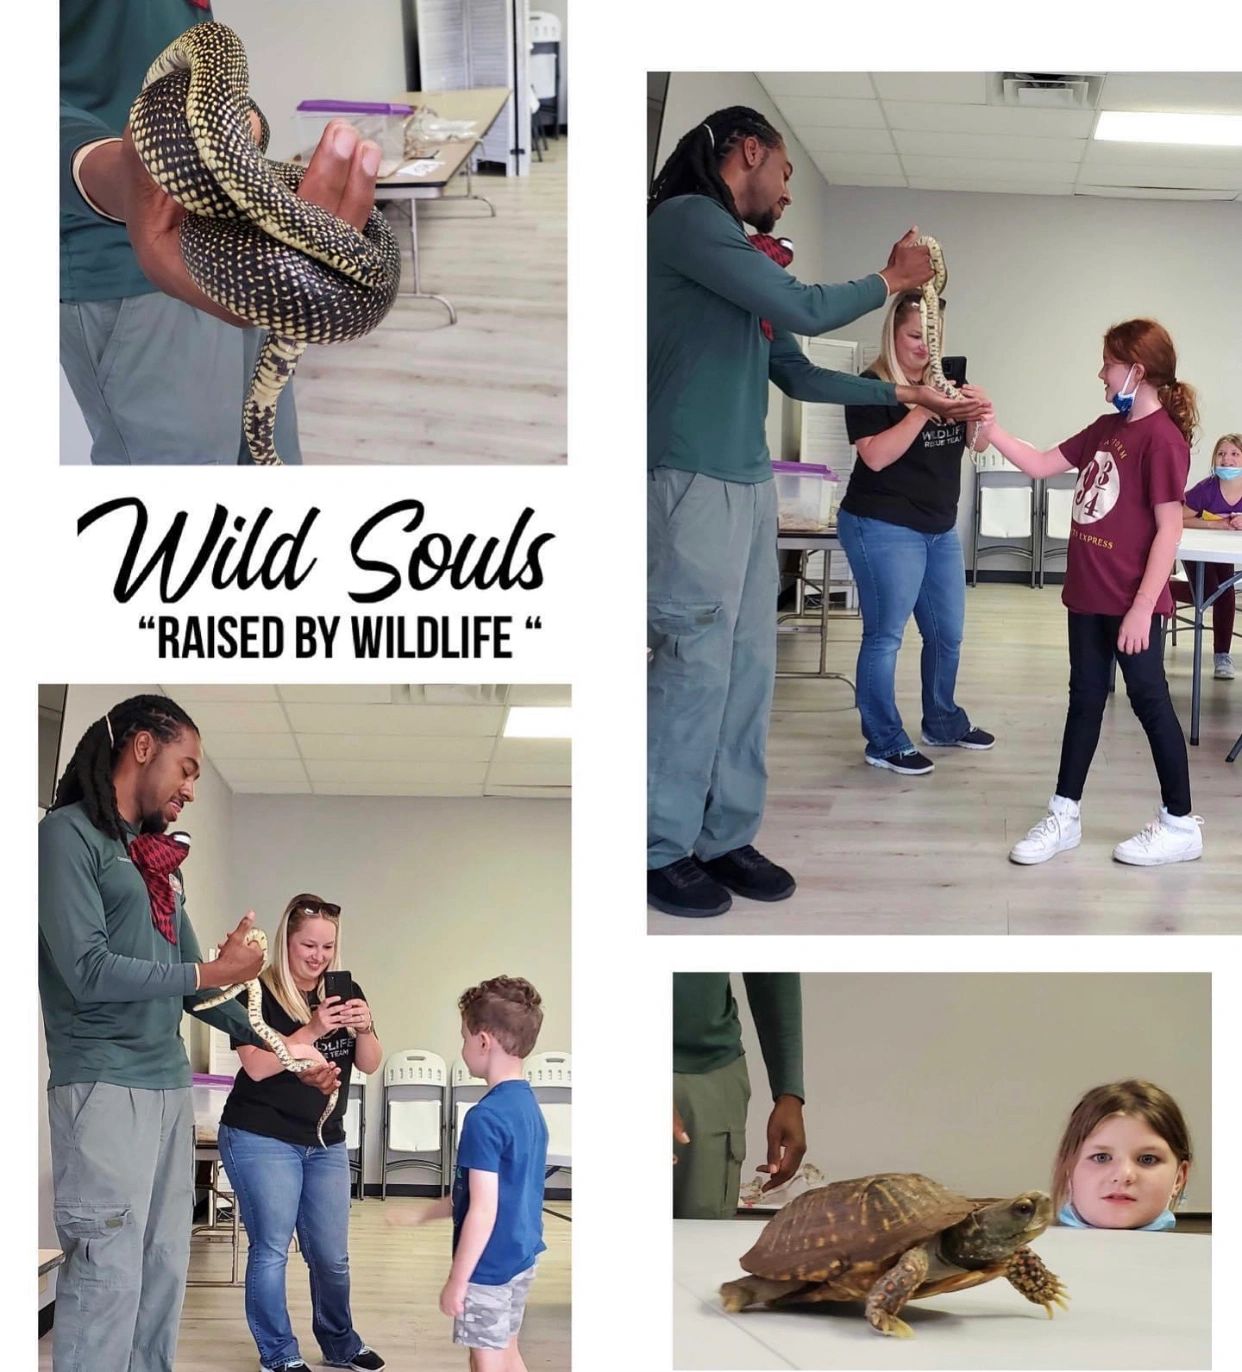 Education and interactive groups. Wild Souls provides community outreach education programs.